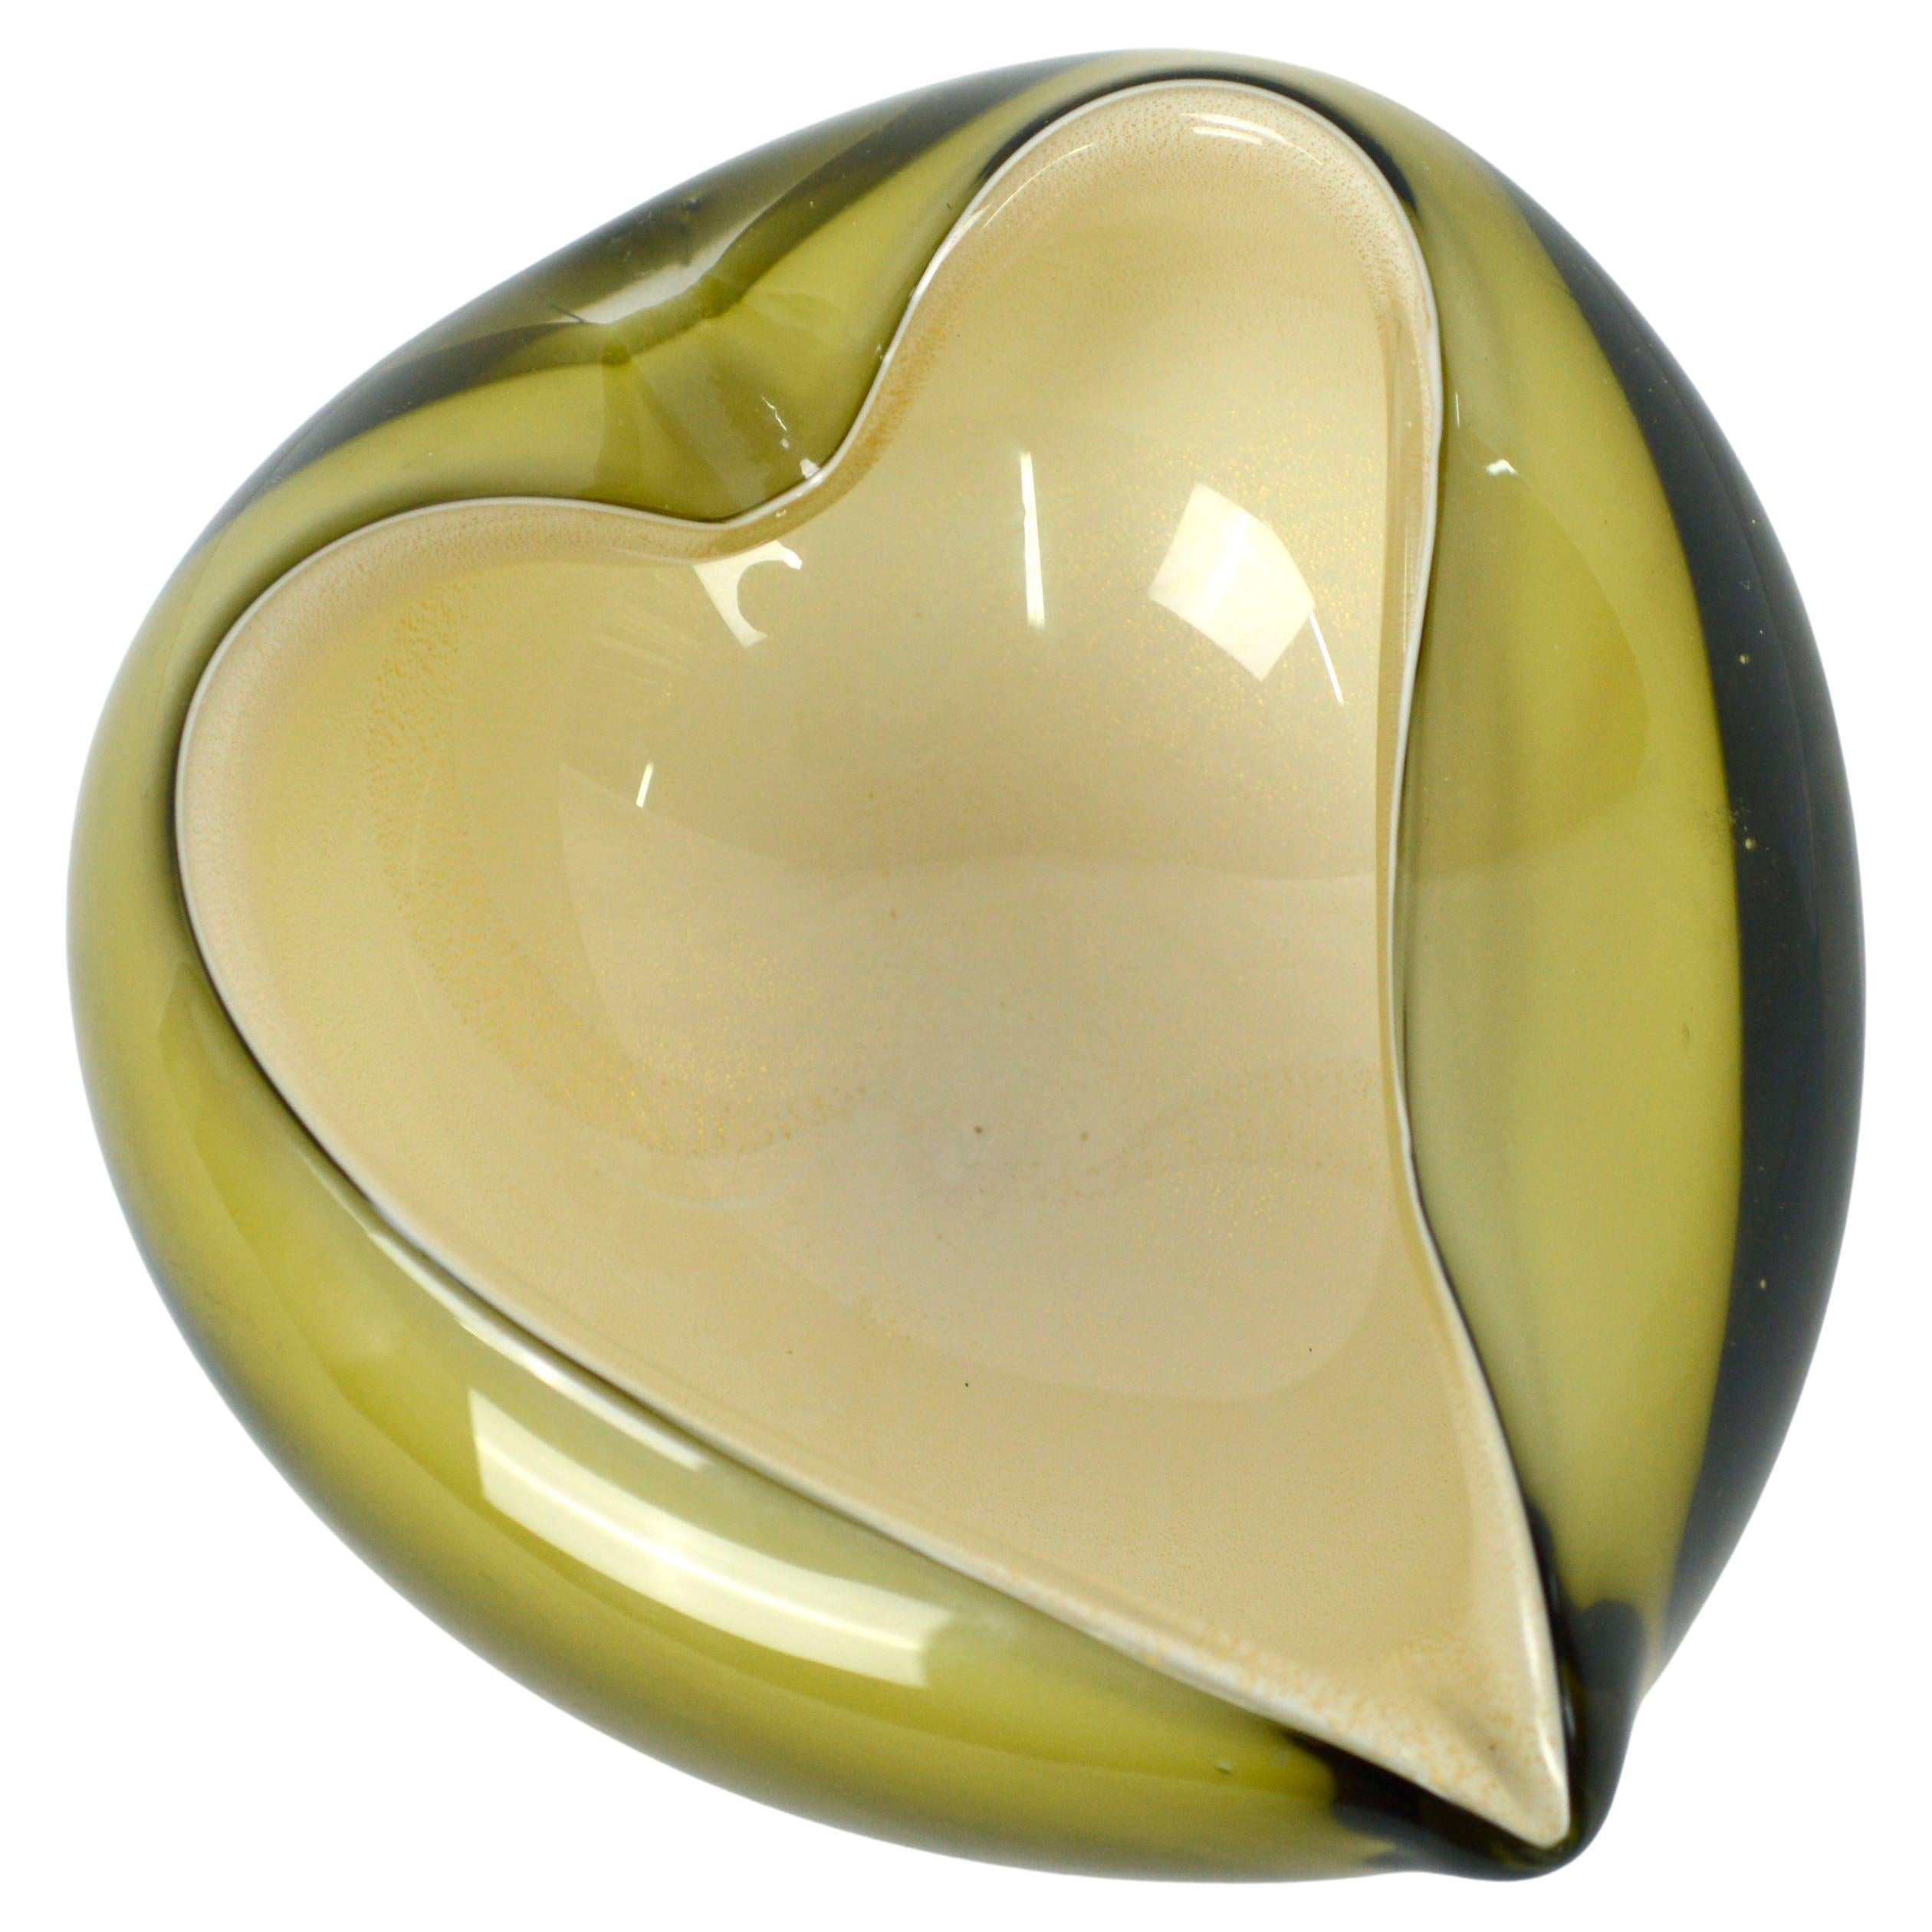 Elegant heart shaped two toned Murano glass bowl, with a transparent olive green/yellow ochre outer layer and an inner layer of gold-flecked cream, attributed to Alfredo Barbini (Italian, 1912-2007). This beautiful piece, which is typical of